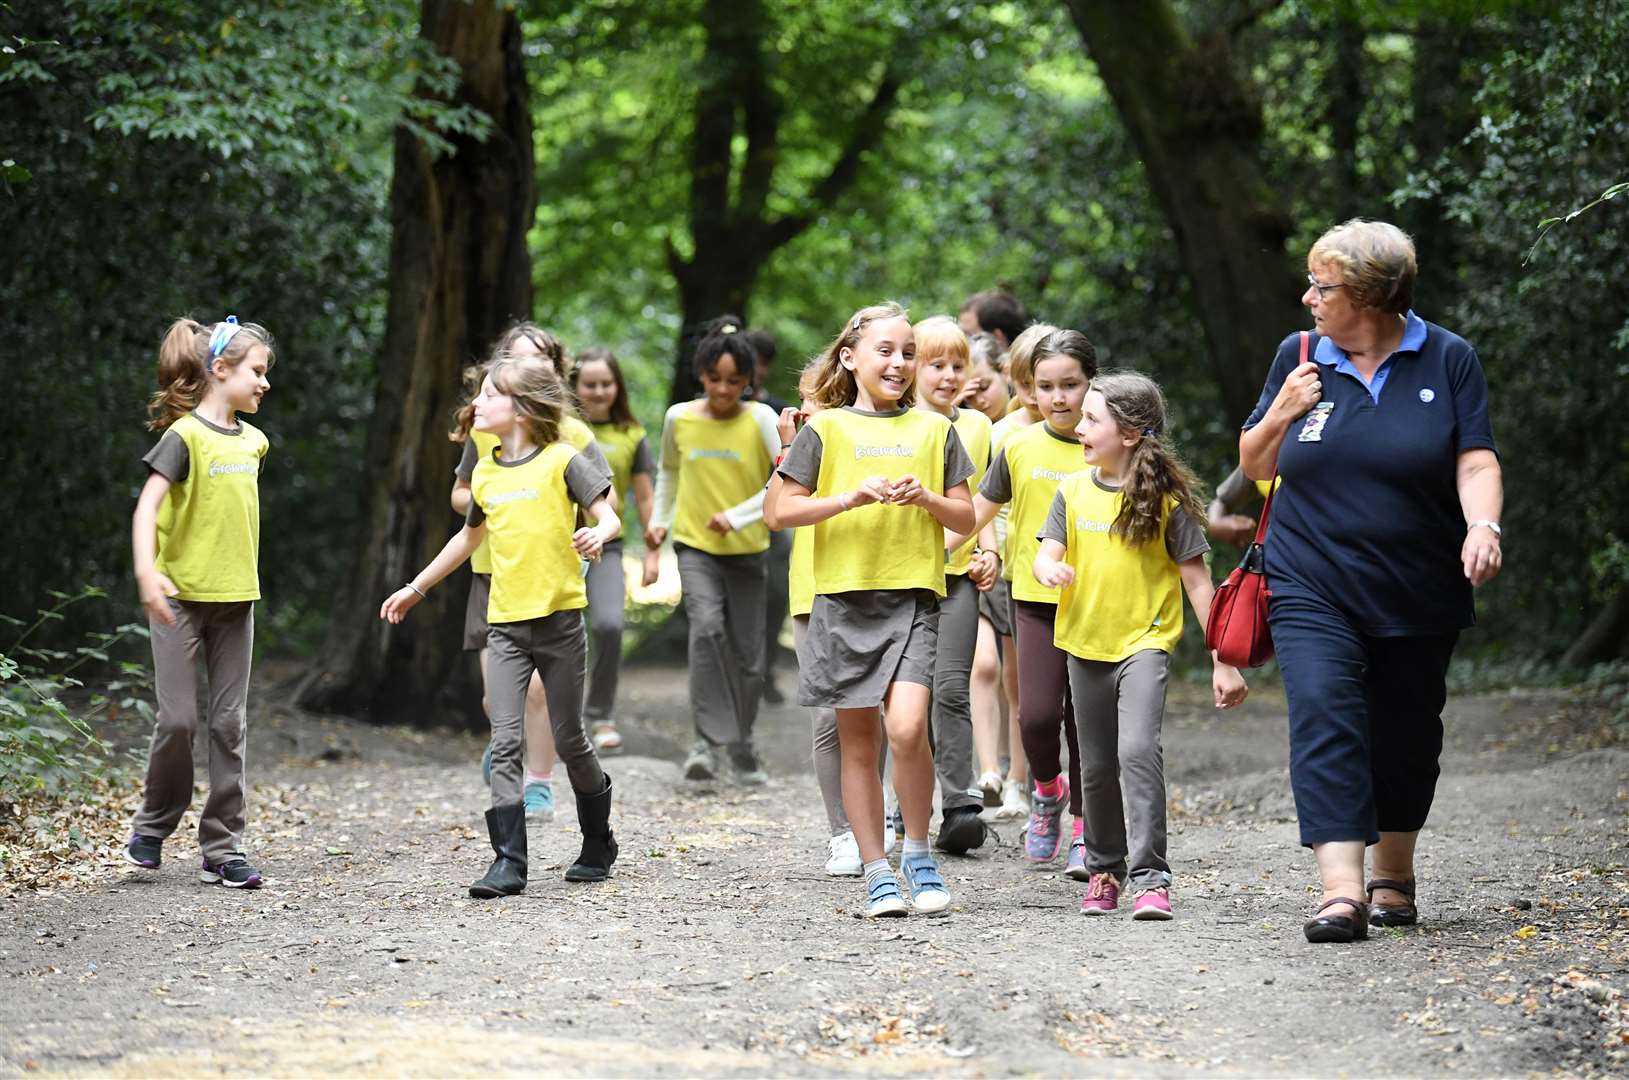 Girlguiding UK works to provide girls with the skills and experiences needed for the modern world. Picture credit: Doug Peters.